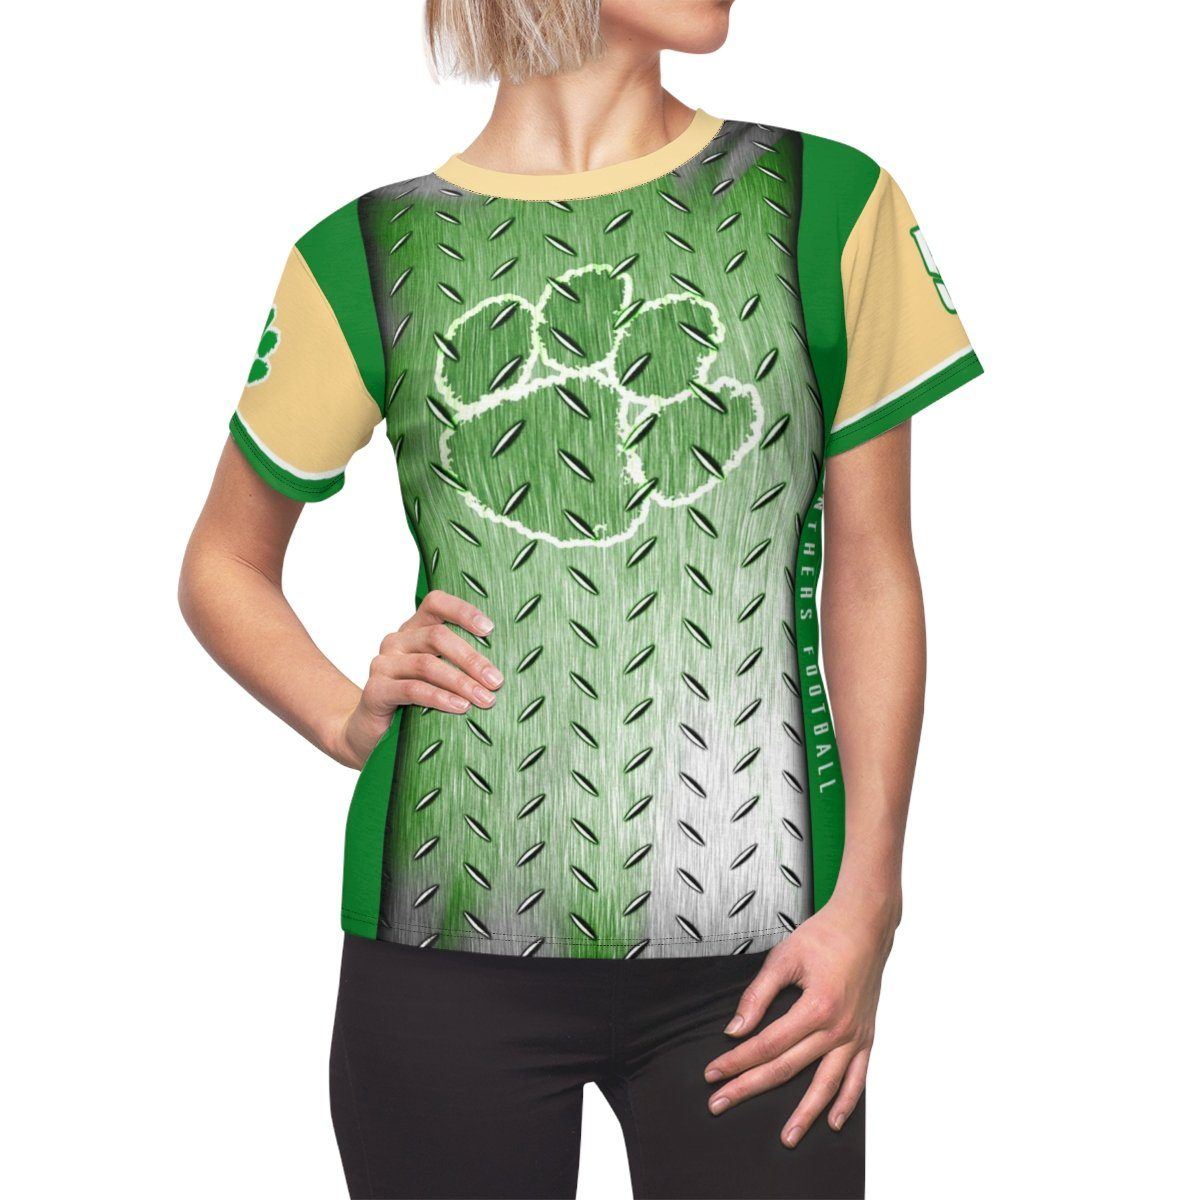 Iron Side - V.4 - Extreme Sportswear Women's Cut & Sew Template-Photoshop Template - PSMGraphix